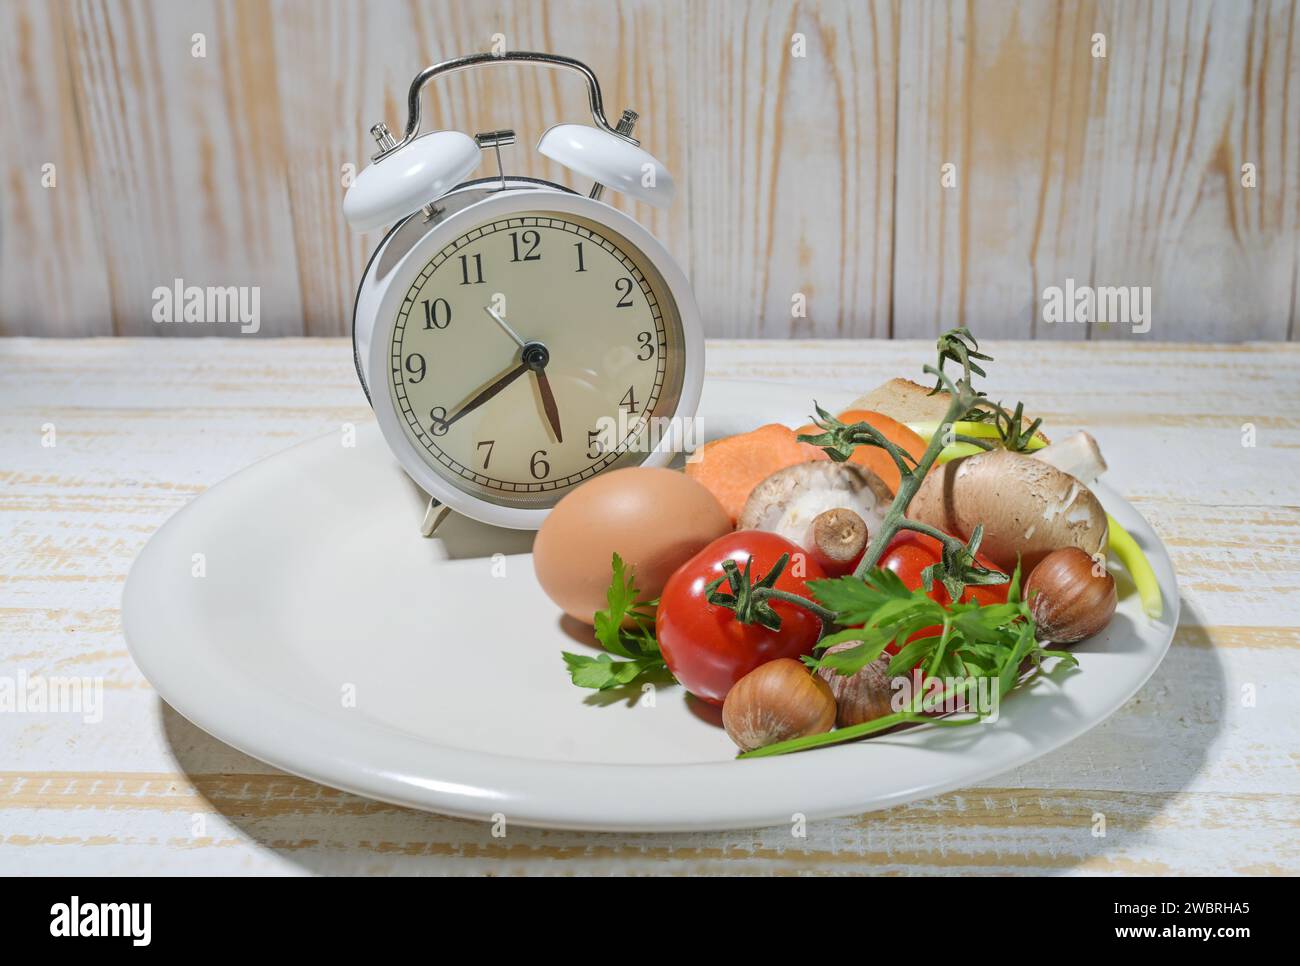 Interval fasting as a healthy diet concept for losing weight, white plate filled to one third with food and an alarm clock on a light rustic wooden ba Stock Photo